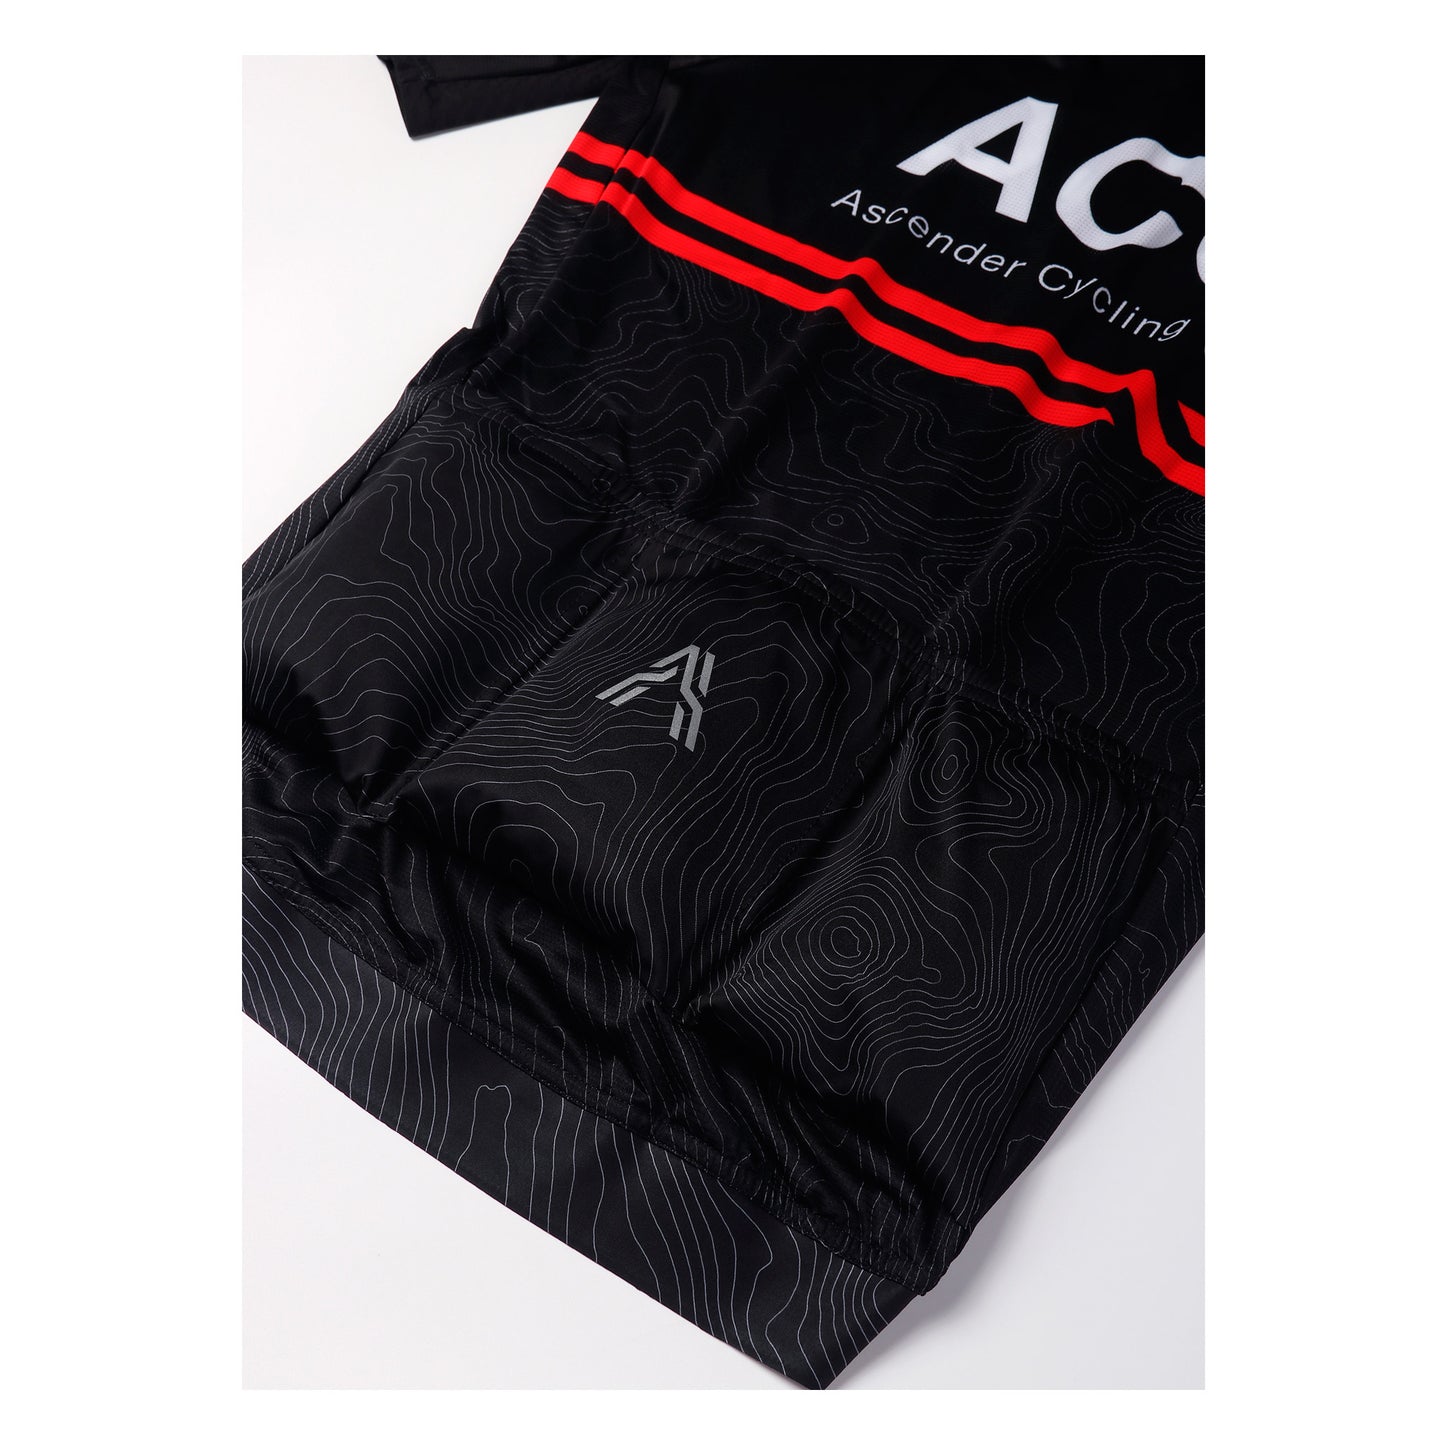 ACC Stellar sustainable cycling short sleeve jersey race cut from Ascender Cycling Club Zürich Switzerland Presentation in Details from Back Panel and Back Cargo Pockets with Reflective Logo